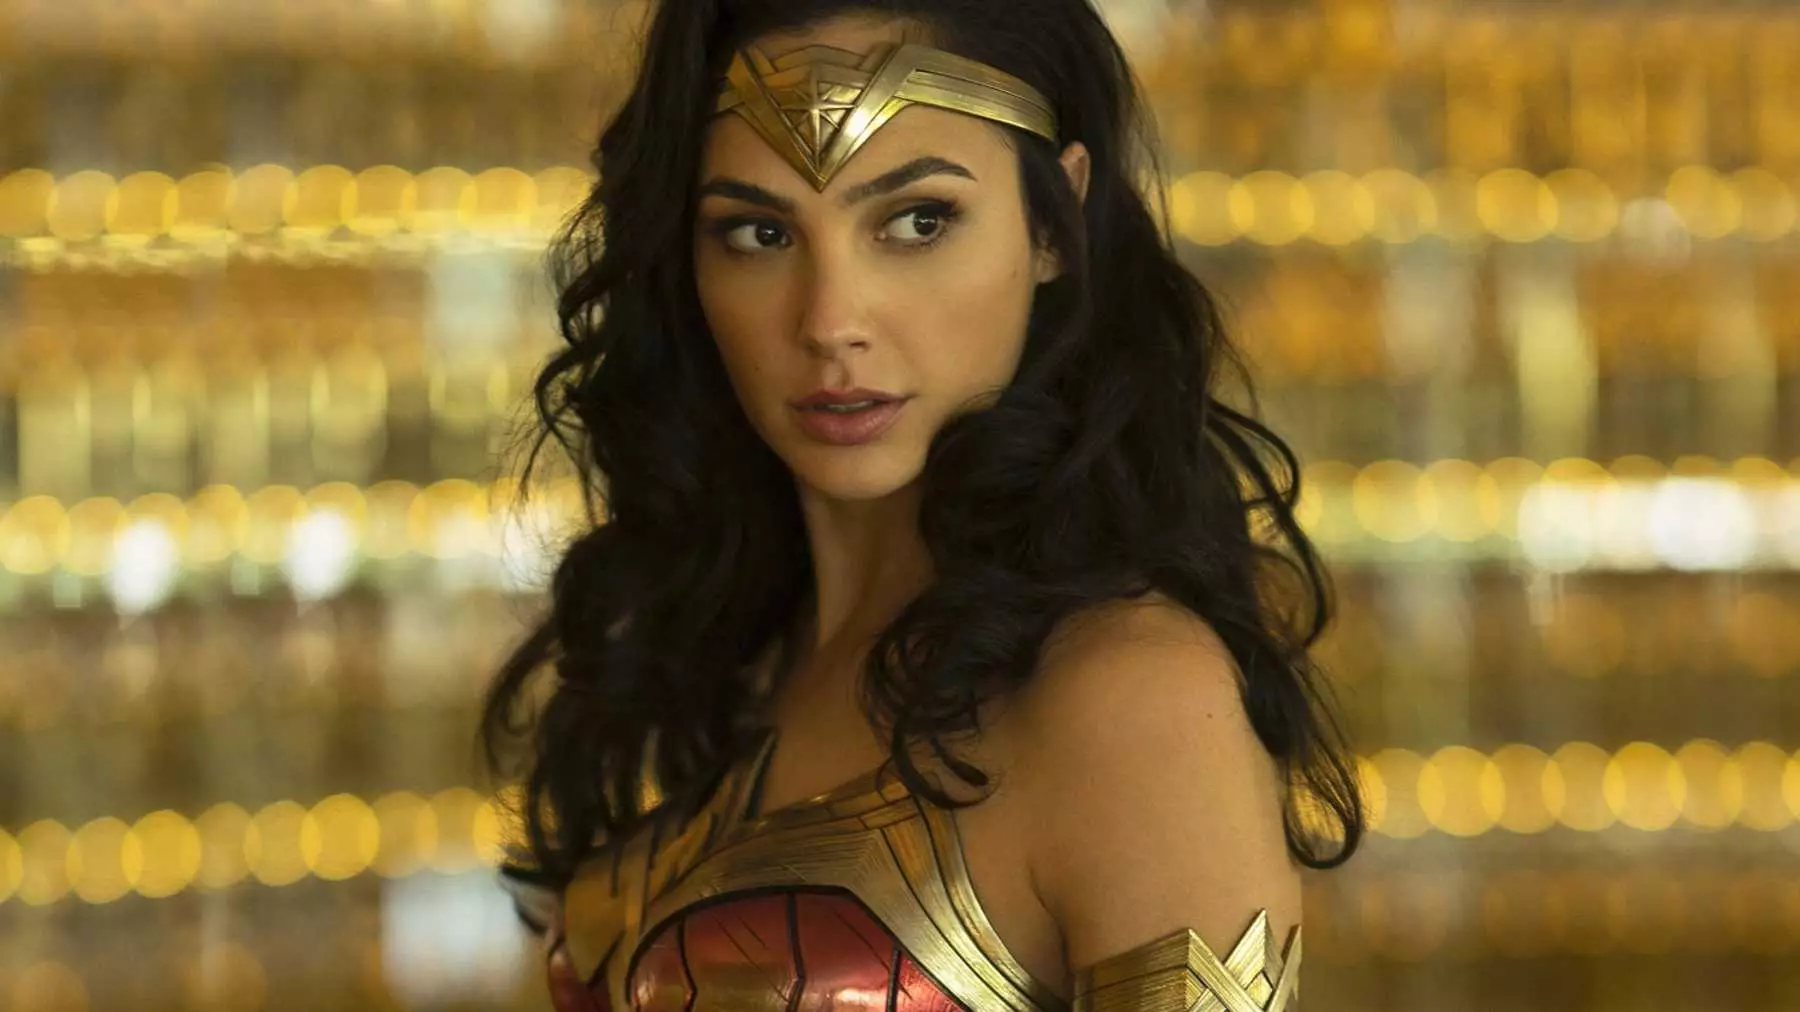 Warner Bros has confirmed that a third Wonder Woman movie is officially in the works (